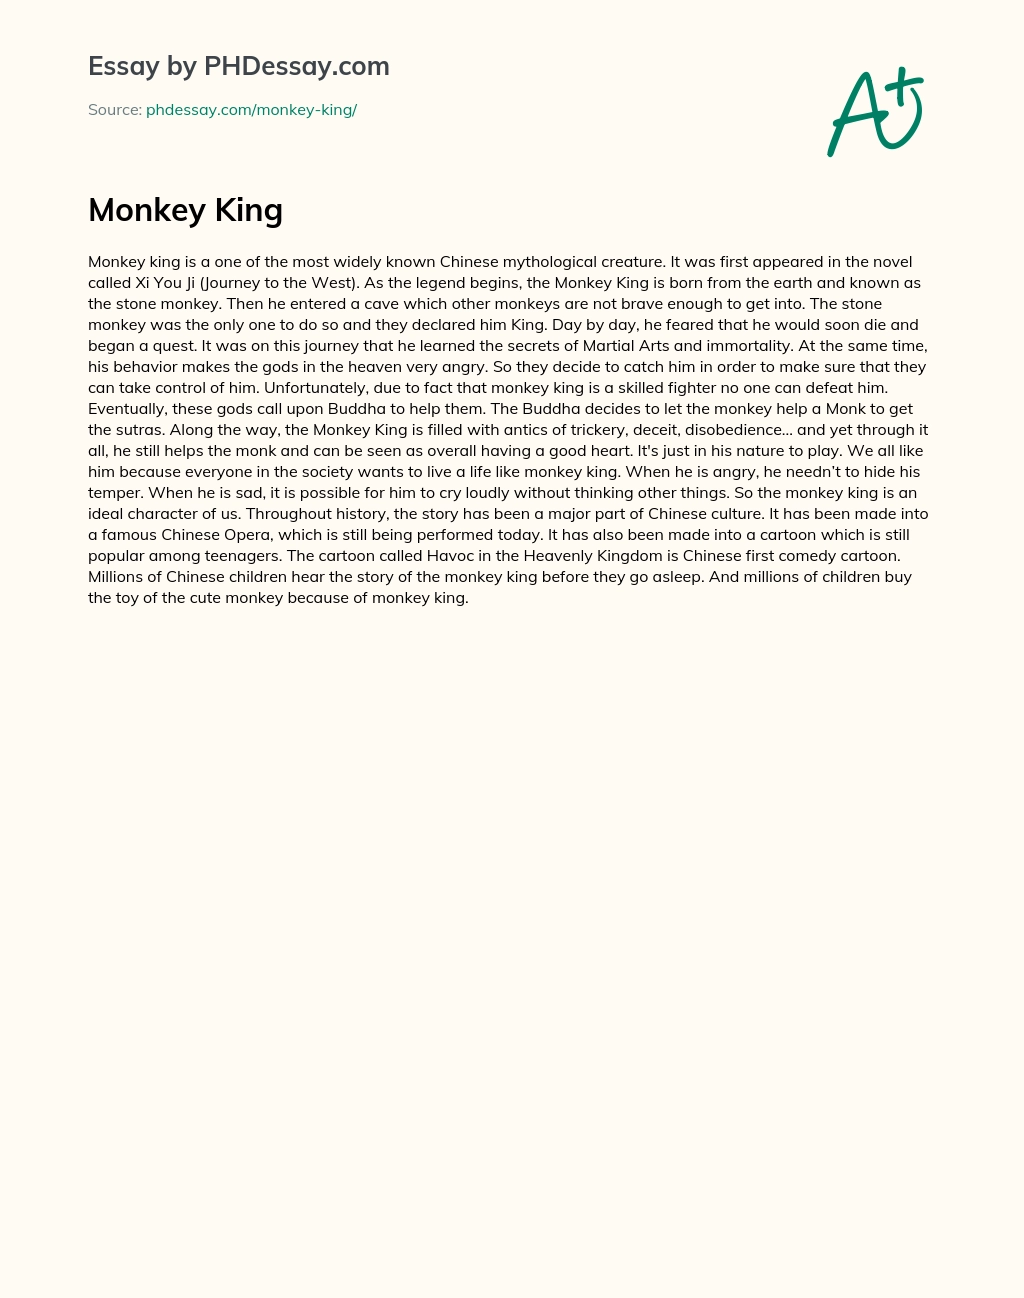 Monkey King: A Chinese Mythological Creature with Martial Arts and Immortality Secrets essay